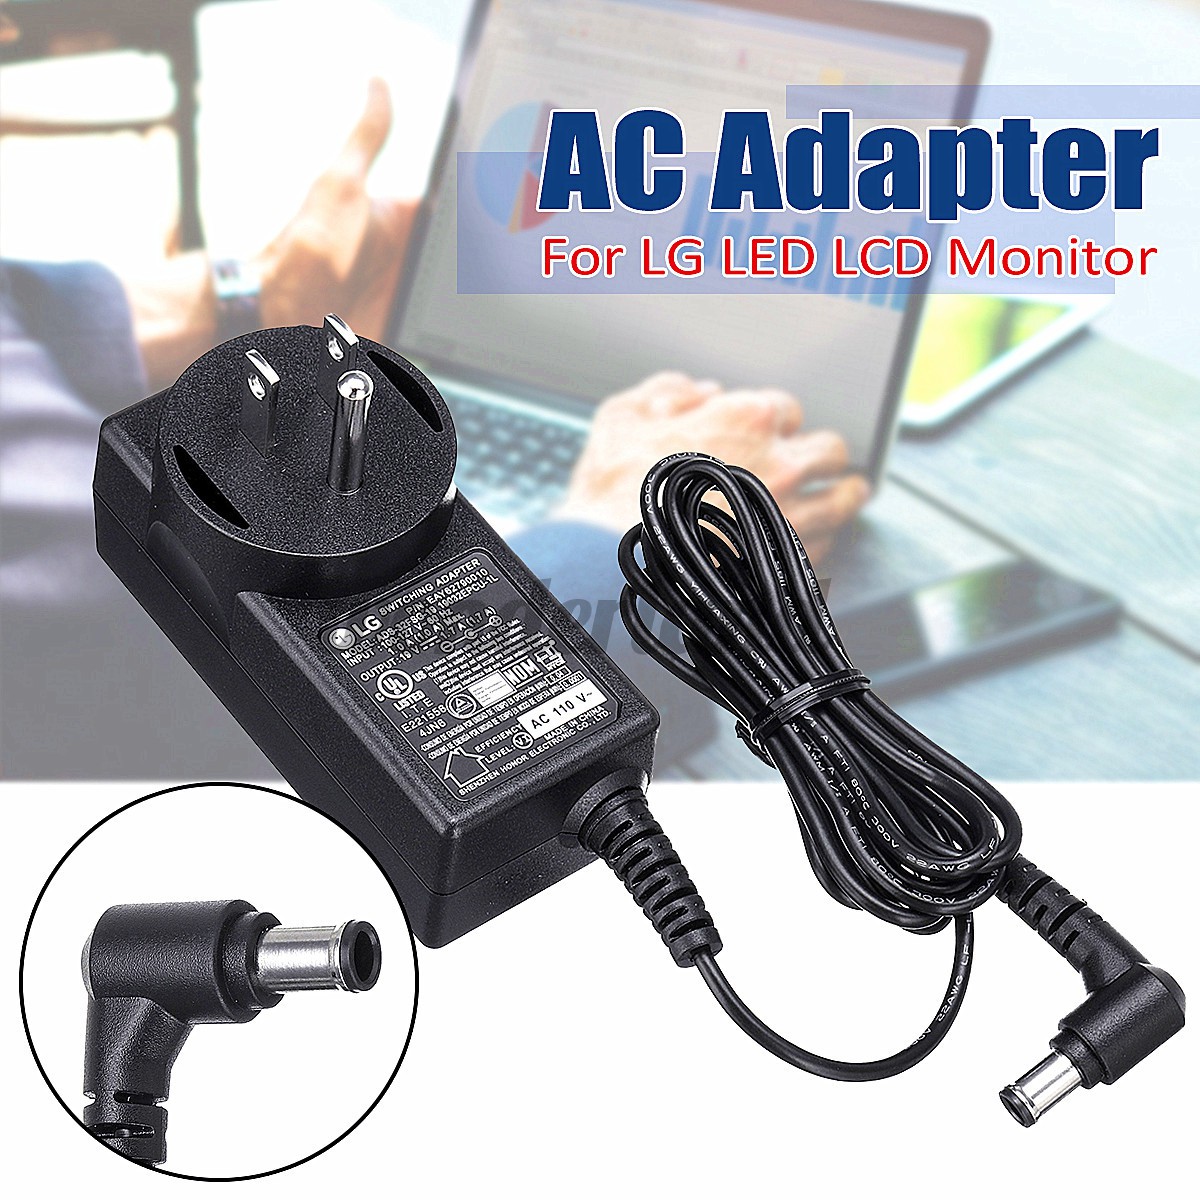 19V 1.7A Switching AC Adapter Power Supply For LG LED LCD Monitor LG power adapter 19V 1.7A ADS